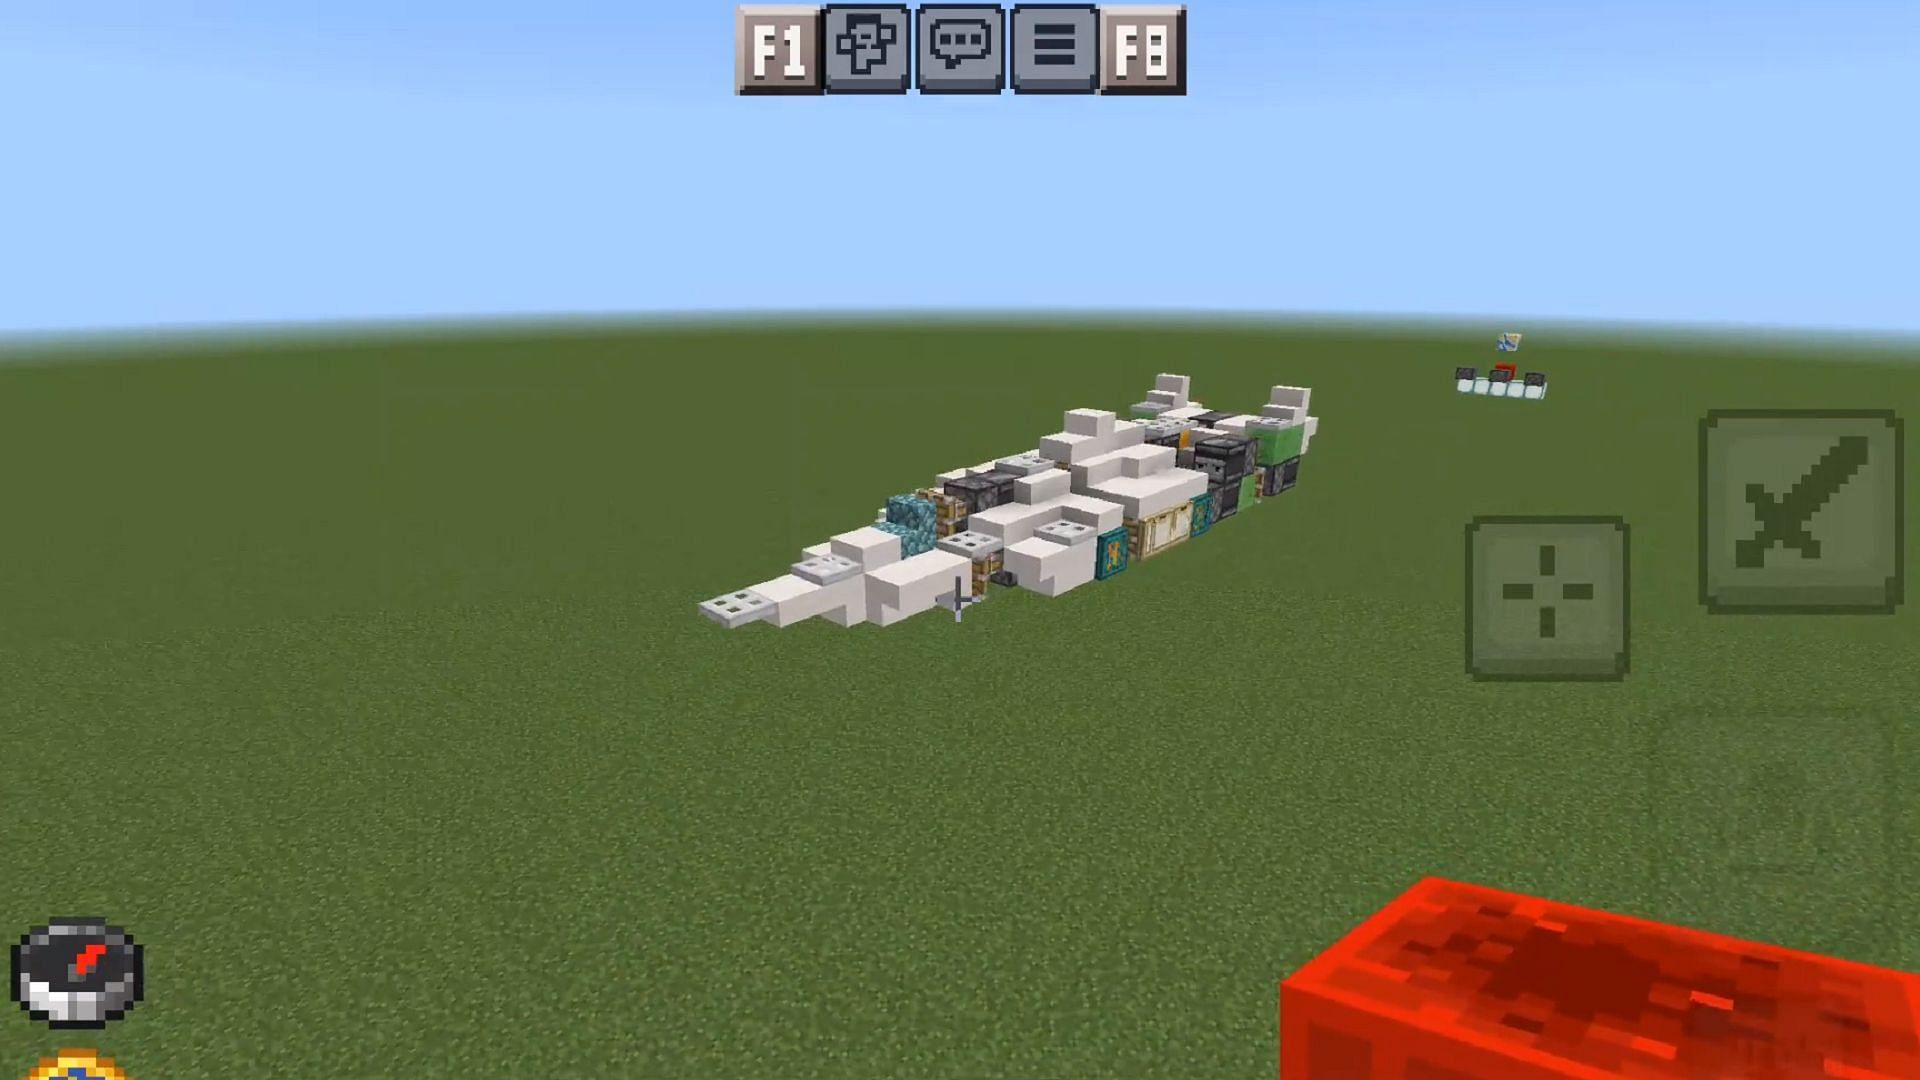 A Minecraft player recently shared their operational spaceship build.